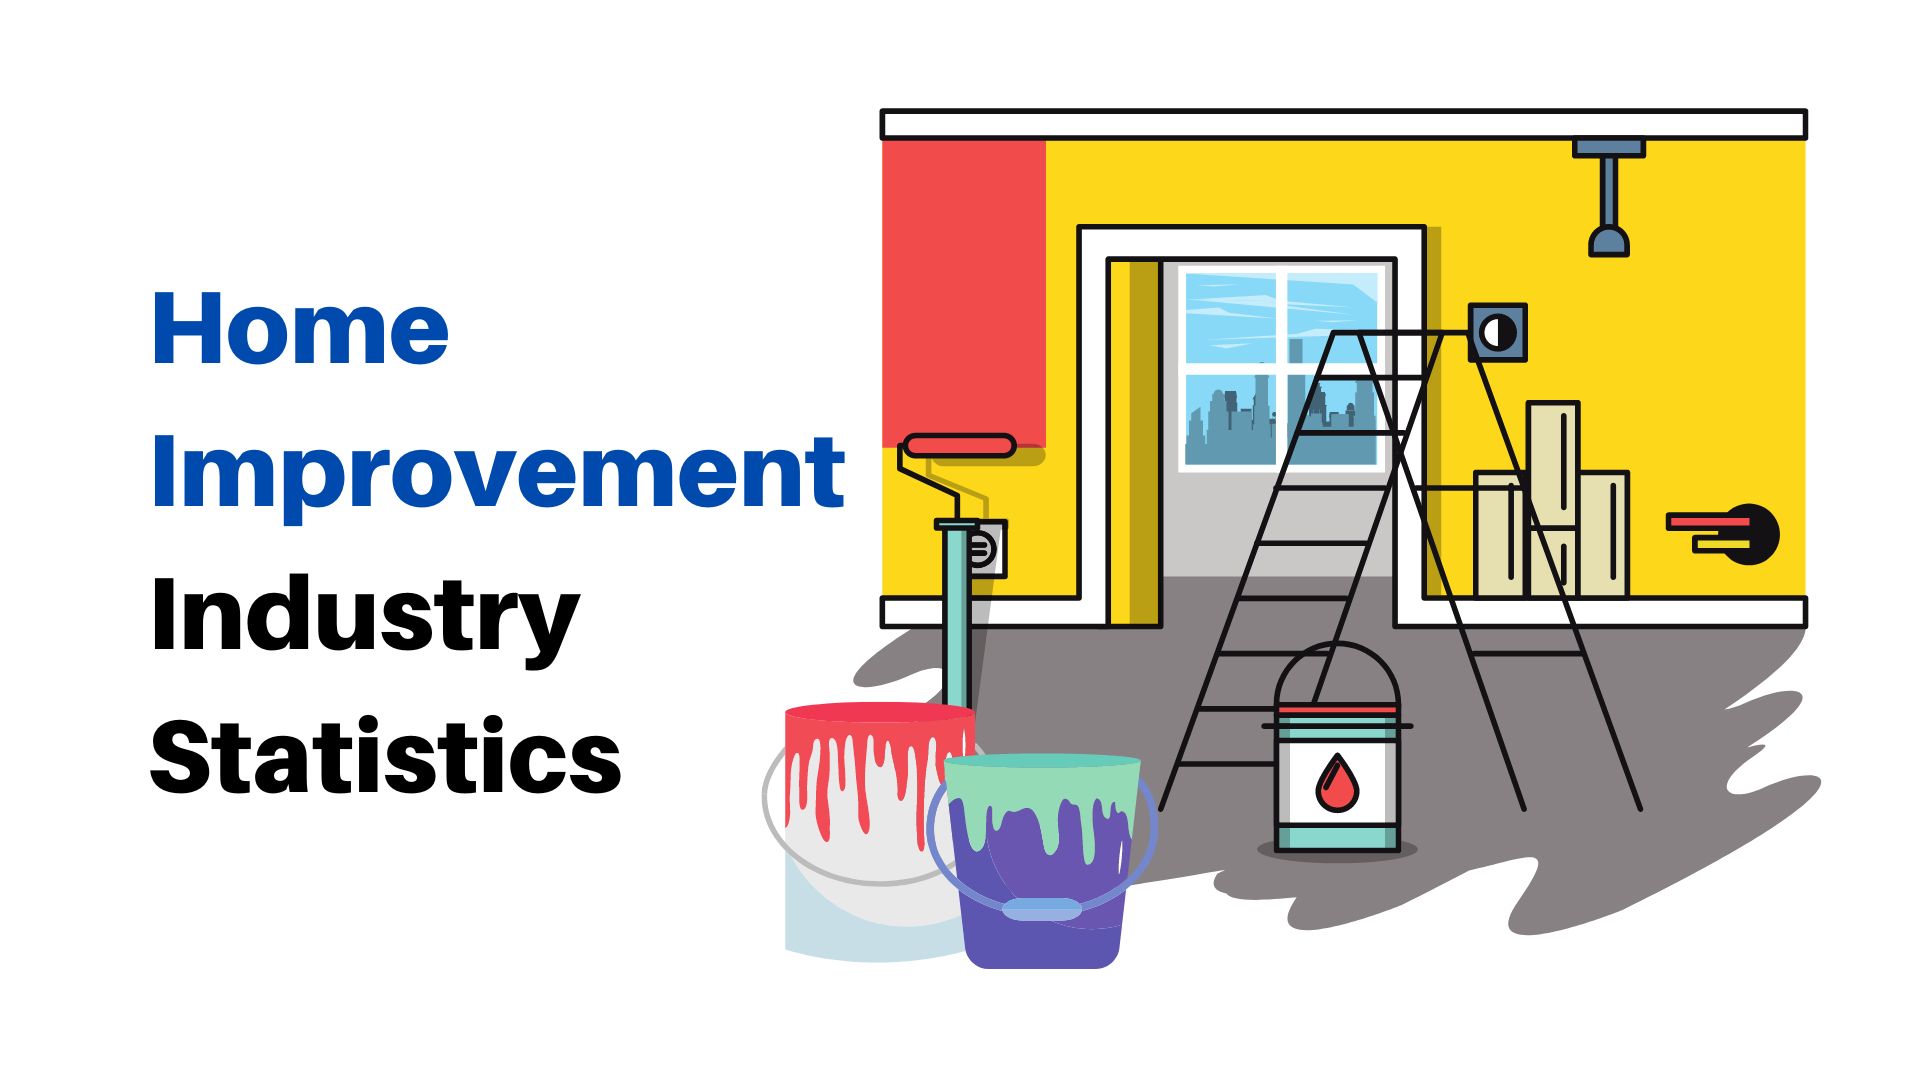 Home Improvement Industry Statistics By Market Size, States, Region, Customer Satisfaction, Funding